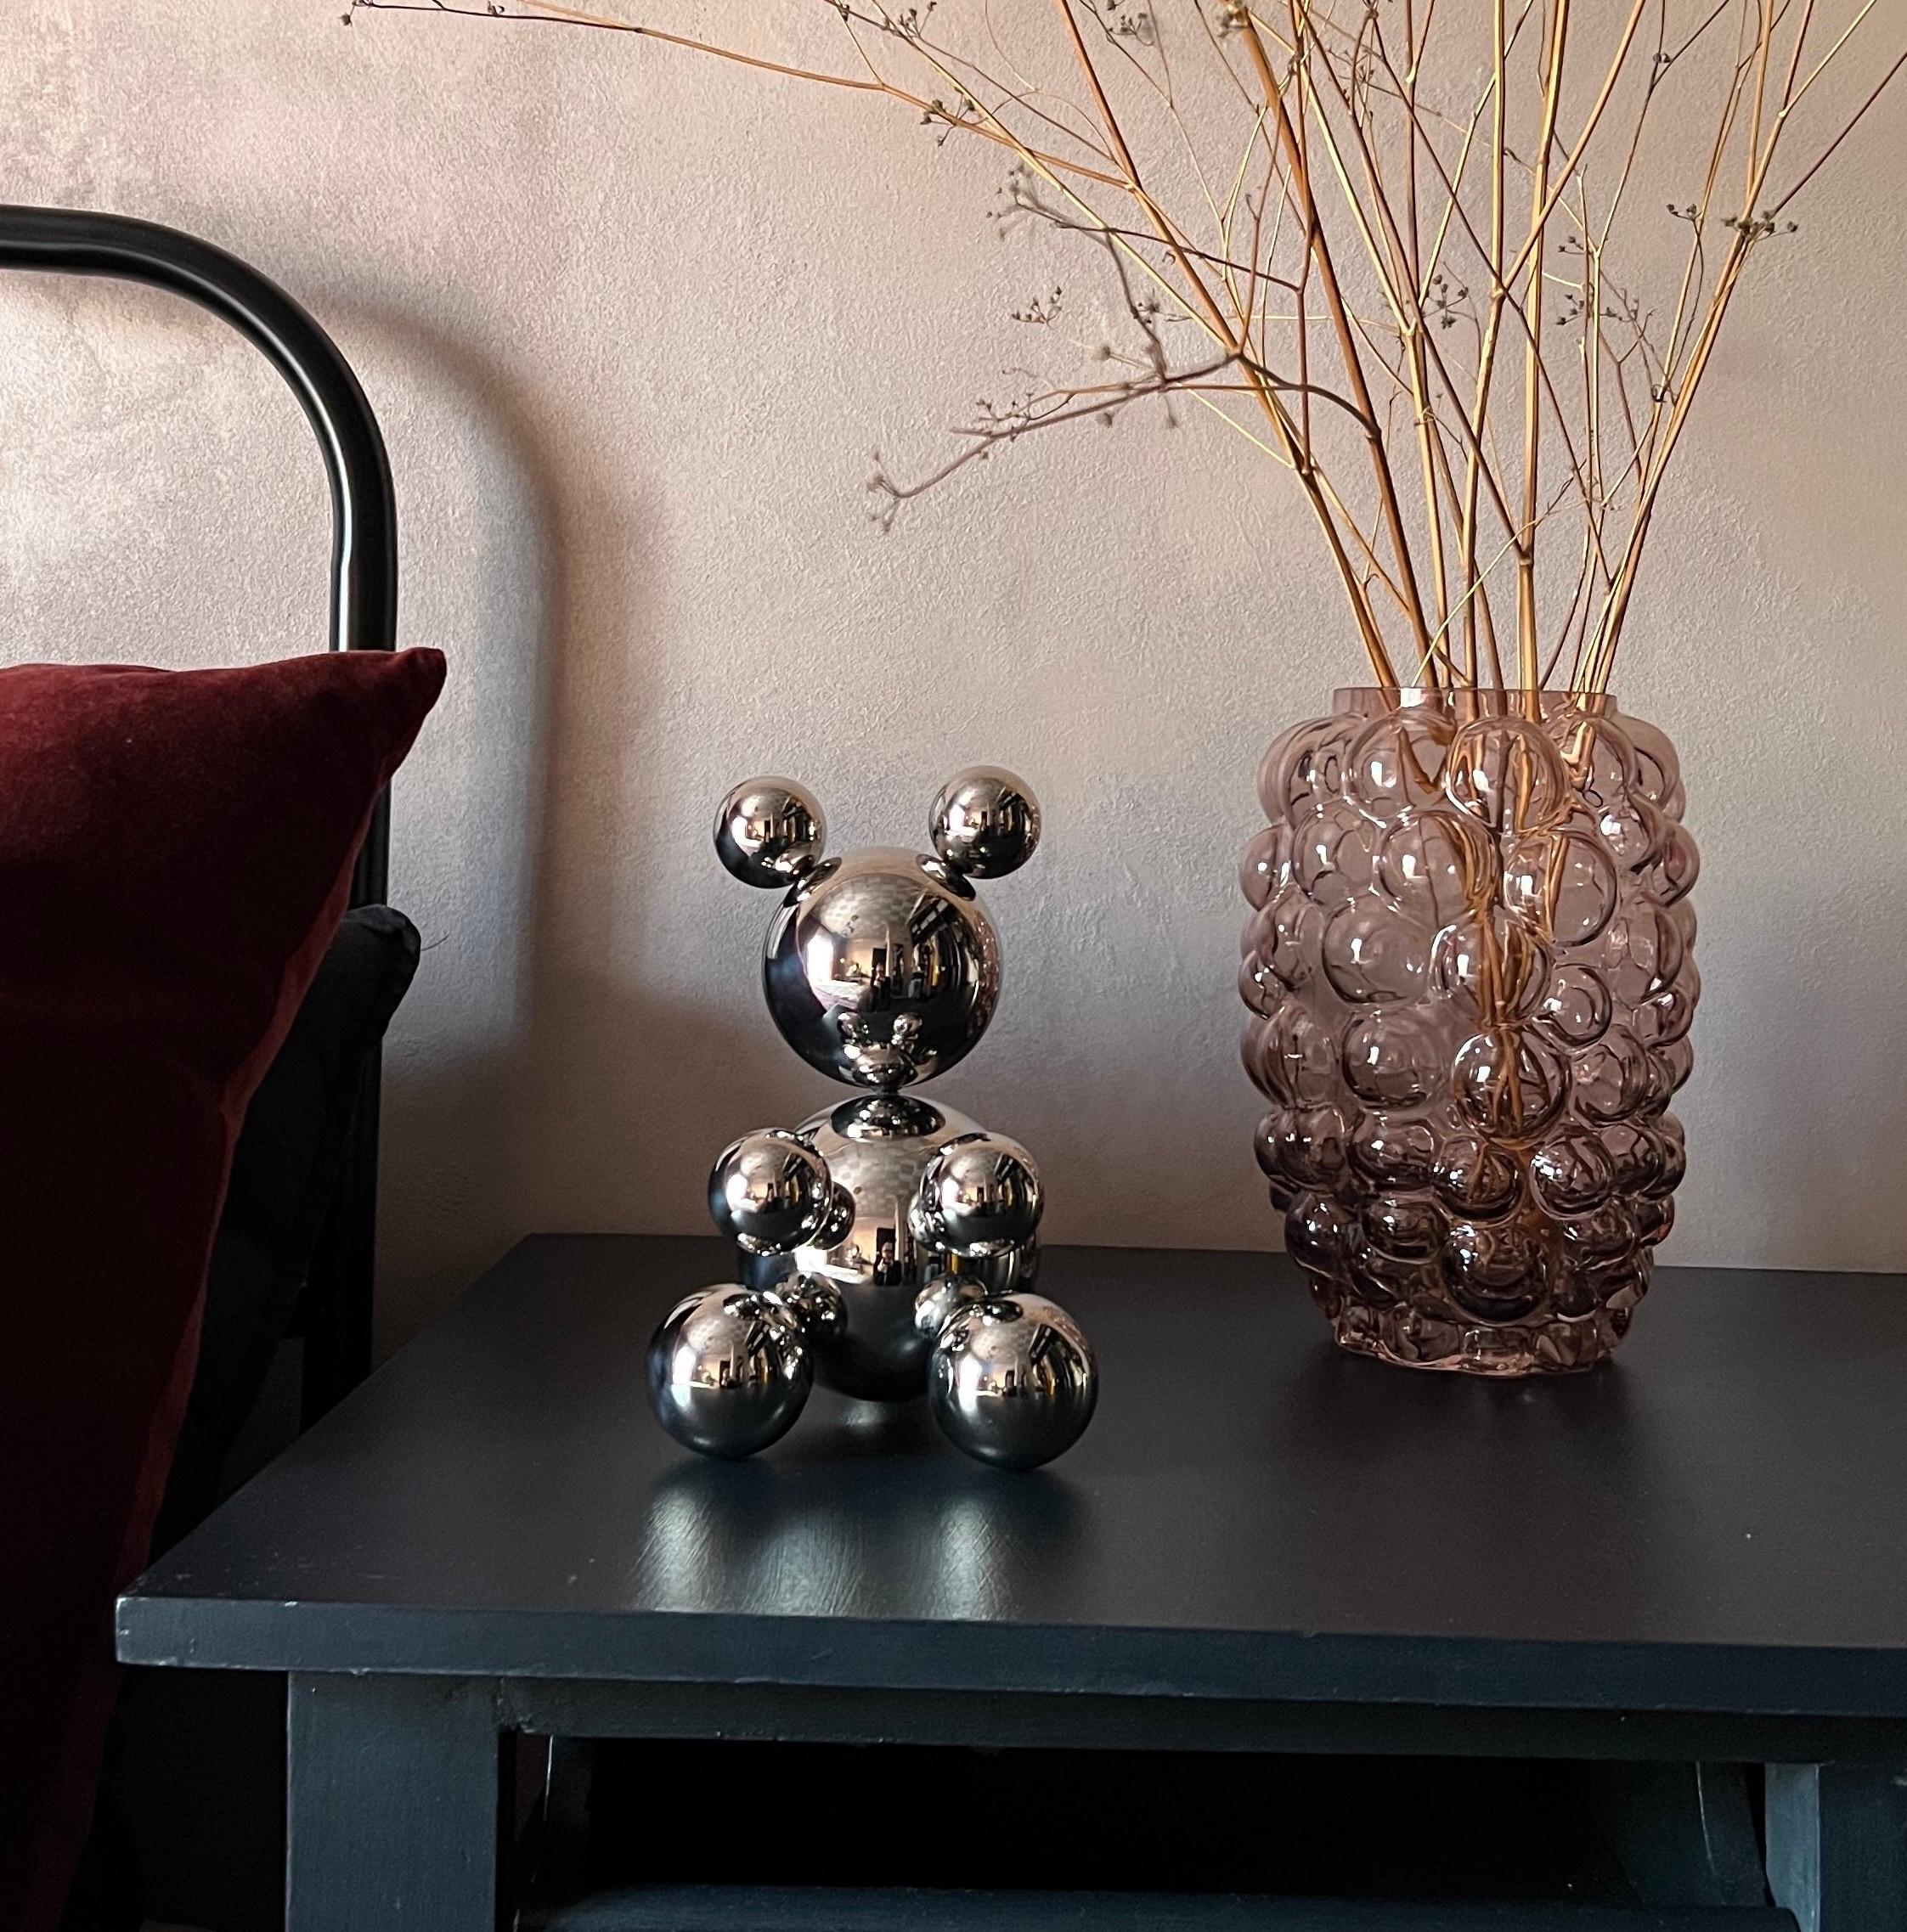 Small Stainless Steel Bear 'Ella' Sculpture Minimalistic Animal - Brown Figurative Sculpture by IRENA TONE